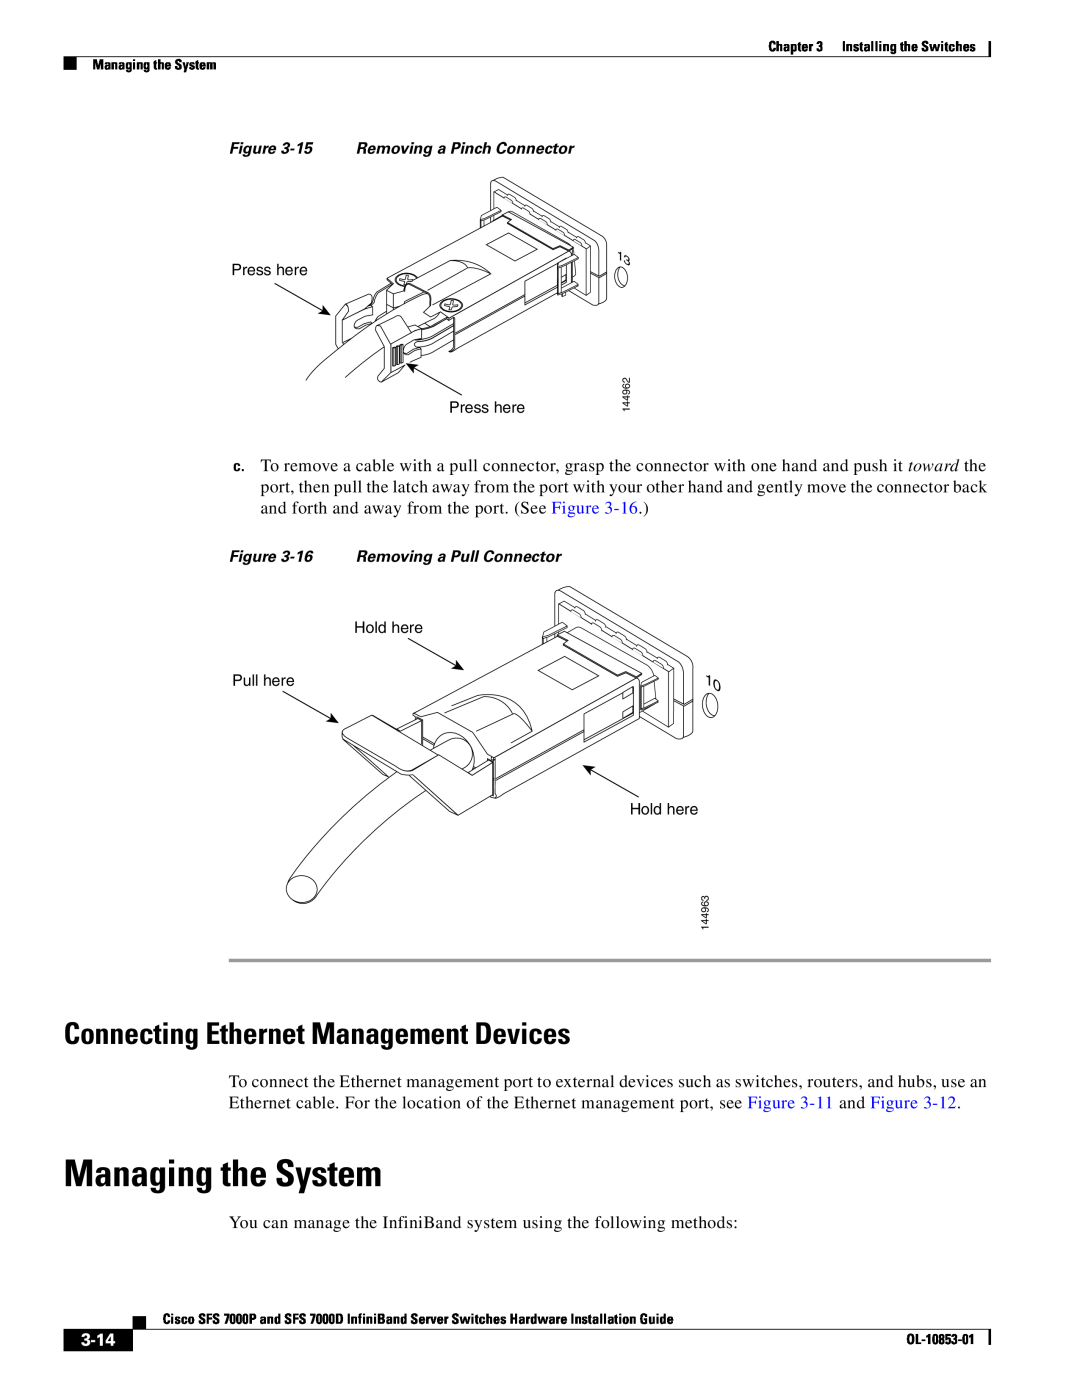 Cisco Systems SFS 7000P, SFS 7000D manual Managing the System, Connecting Ethernet Management Devices, 3-14 